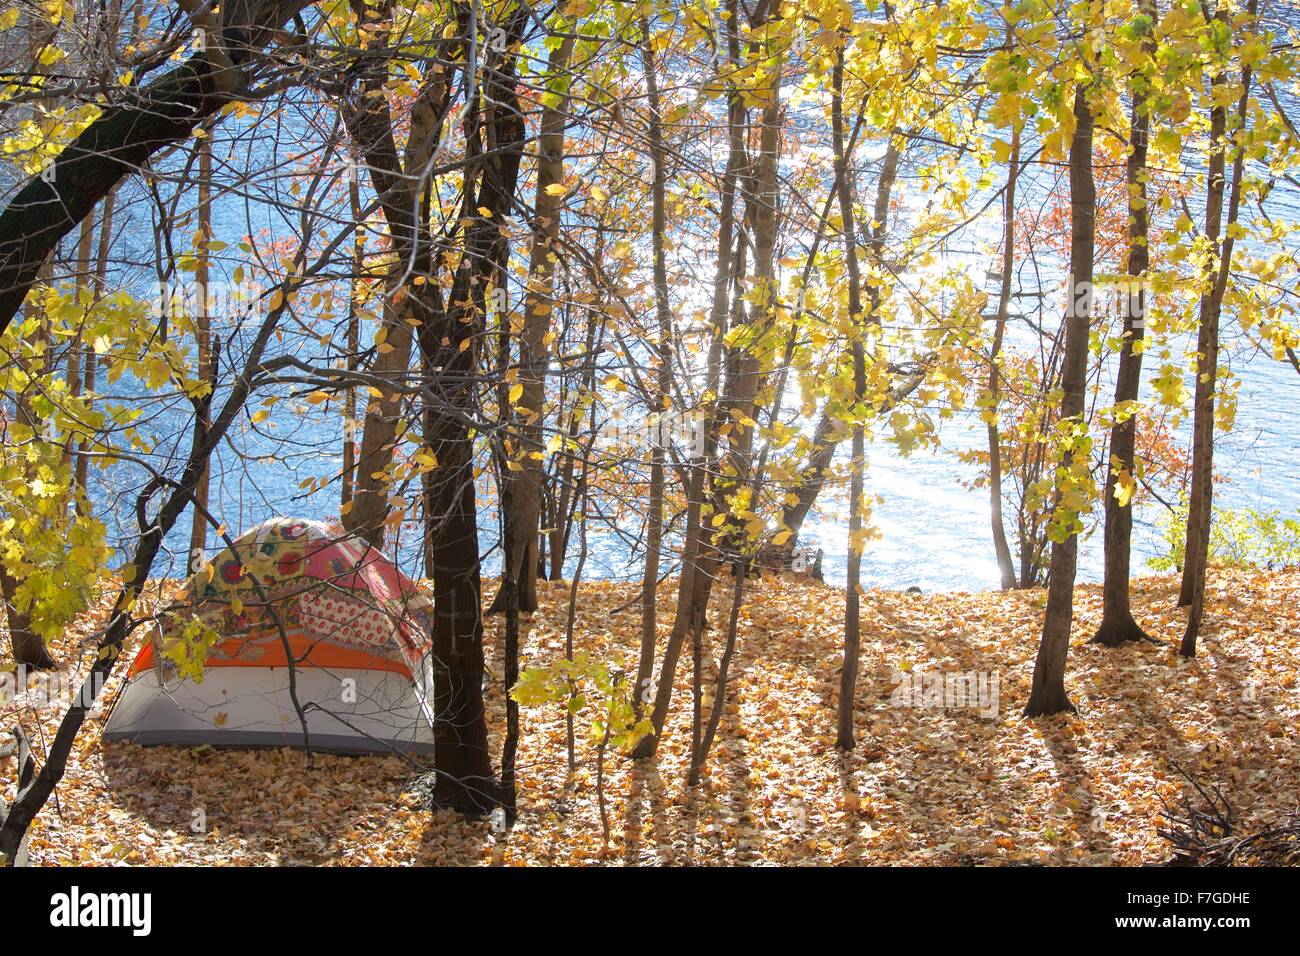 A tent set up next to a river in fall foliage. Stock Photo